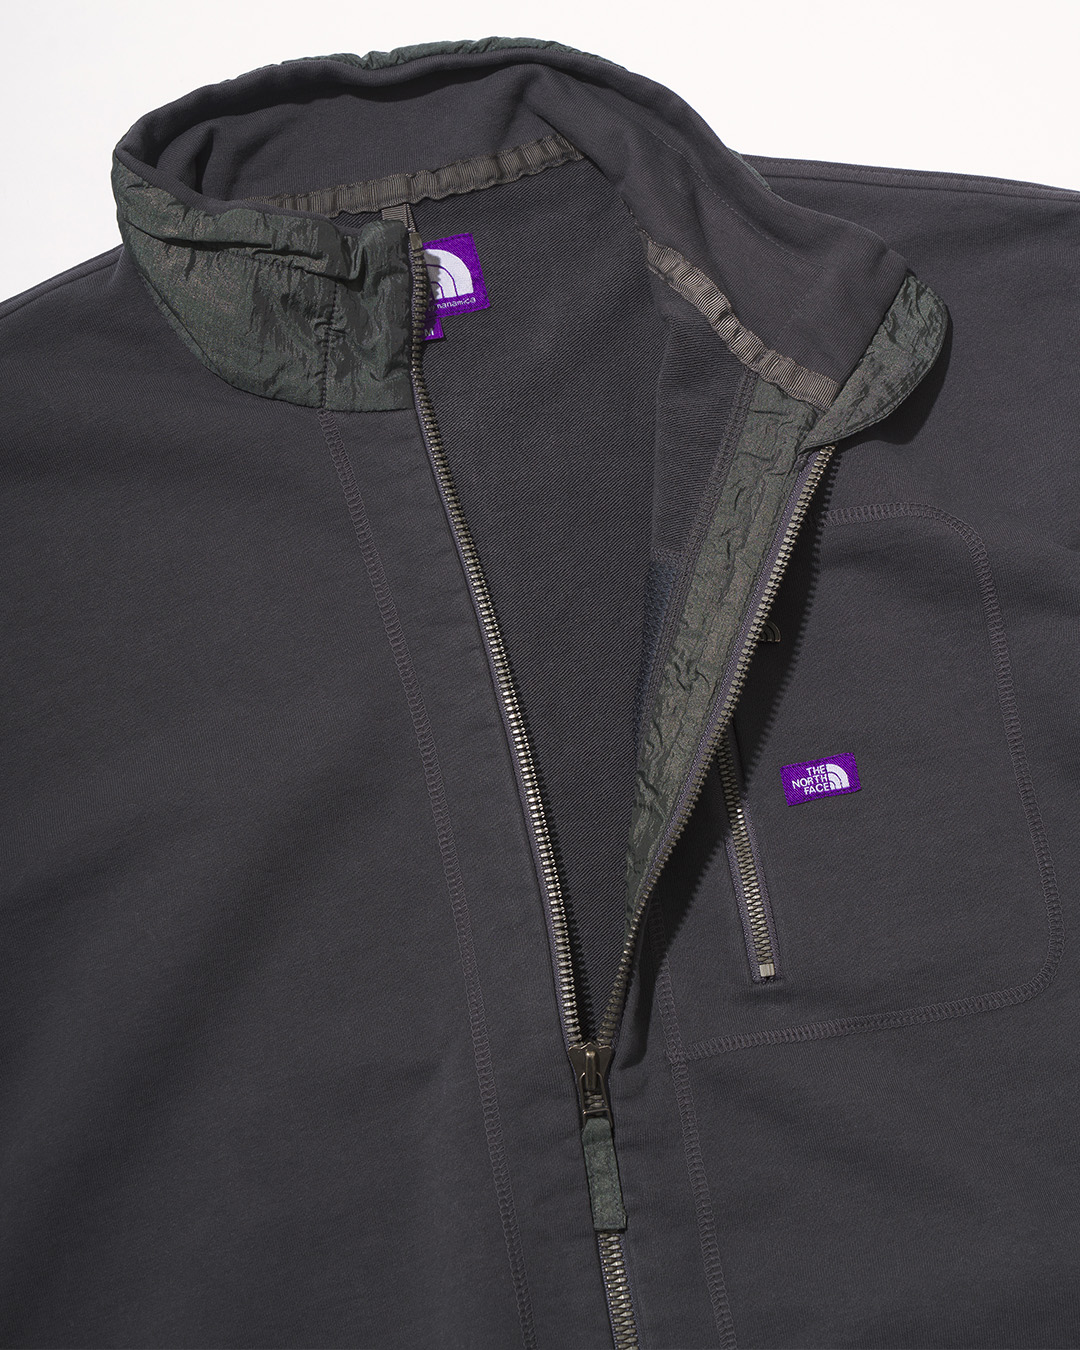 nanamica / THE NORTH FACE PURPLE LABEL / Featured Product vol.25